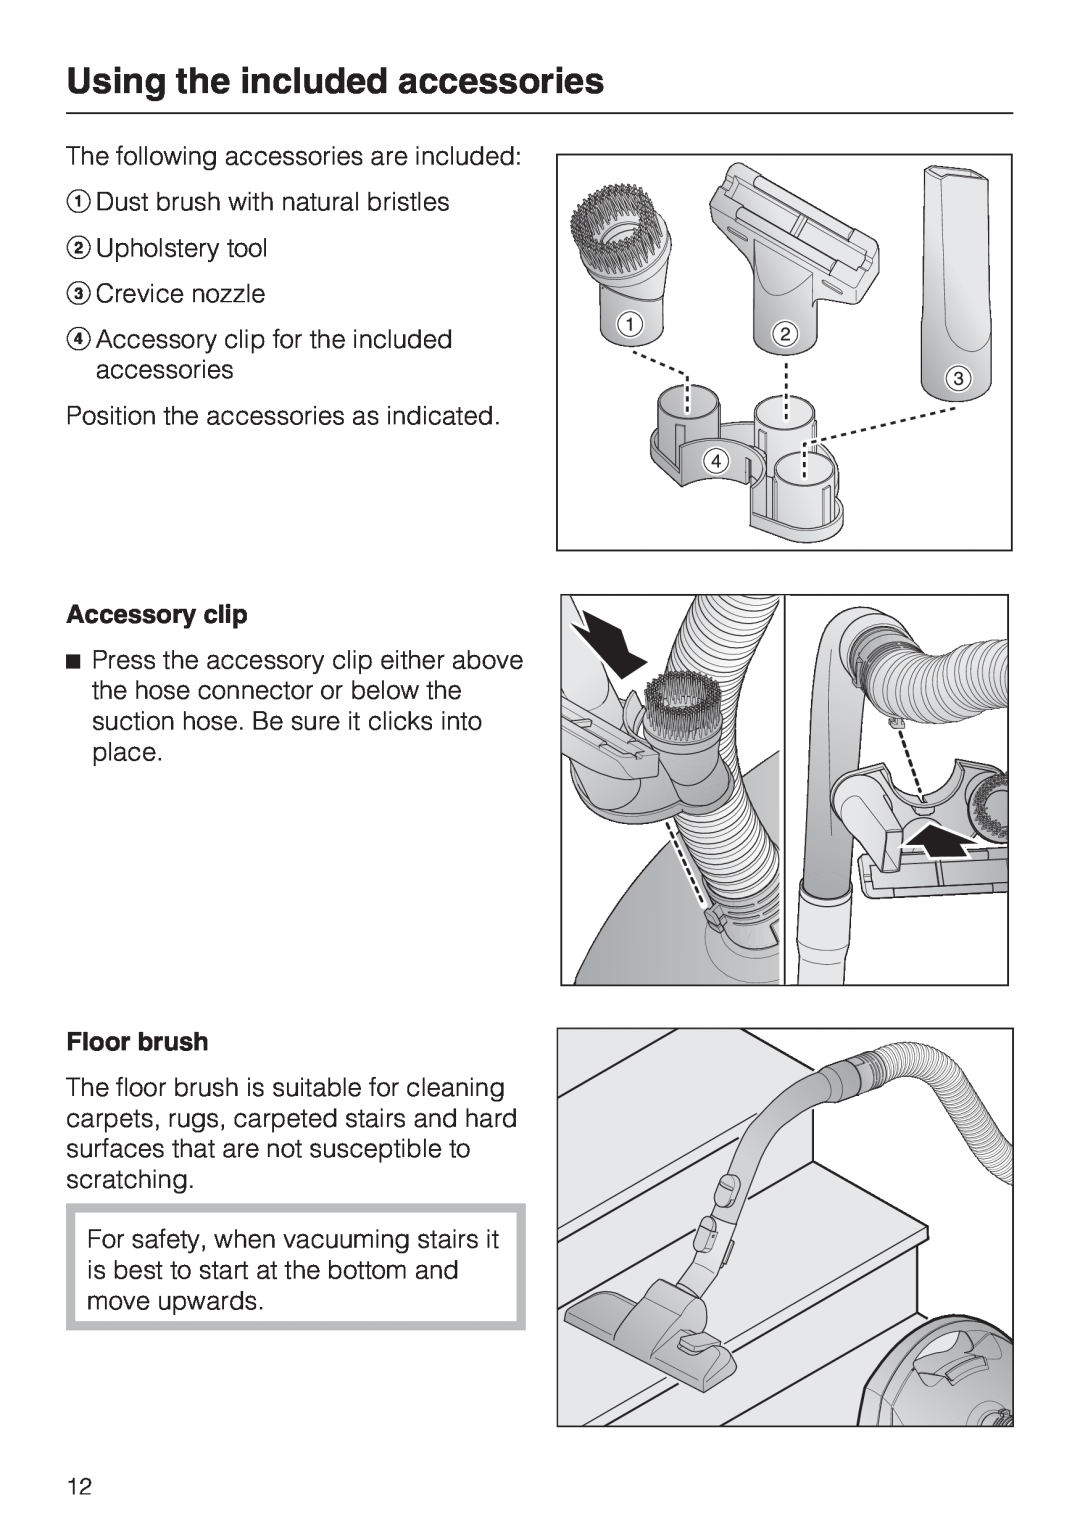 Miele S 2000 operating instructions Using the included accessories, Accessory clip, Floor brush 